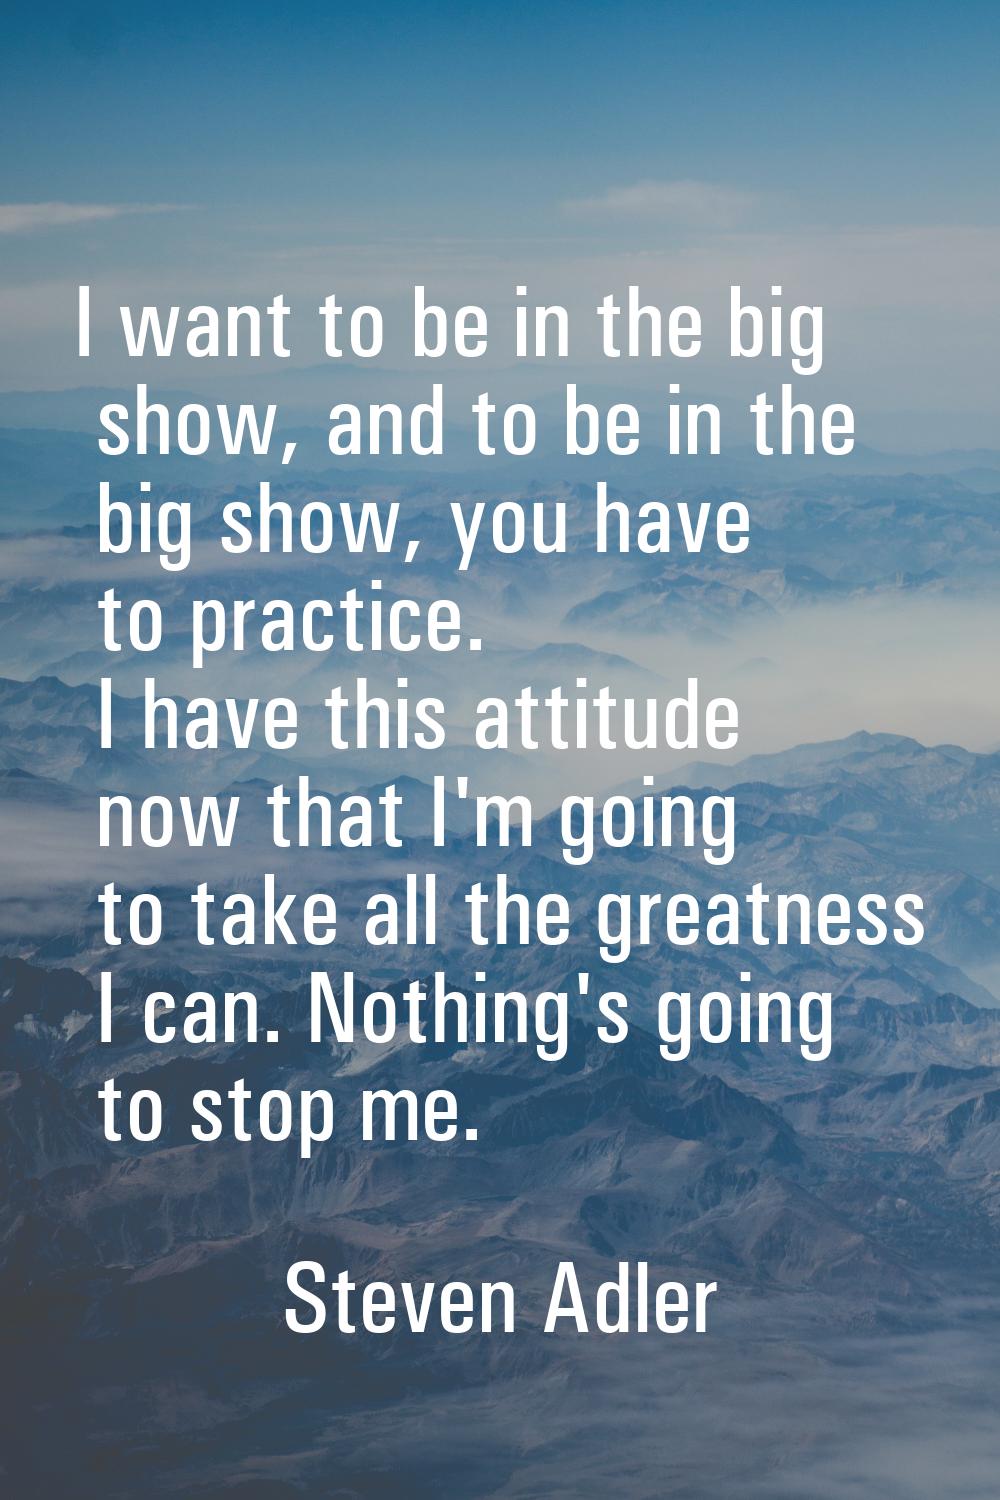 I want to be in the big show, and to be in the big show, you have to practice. I have this attitude